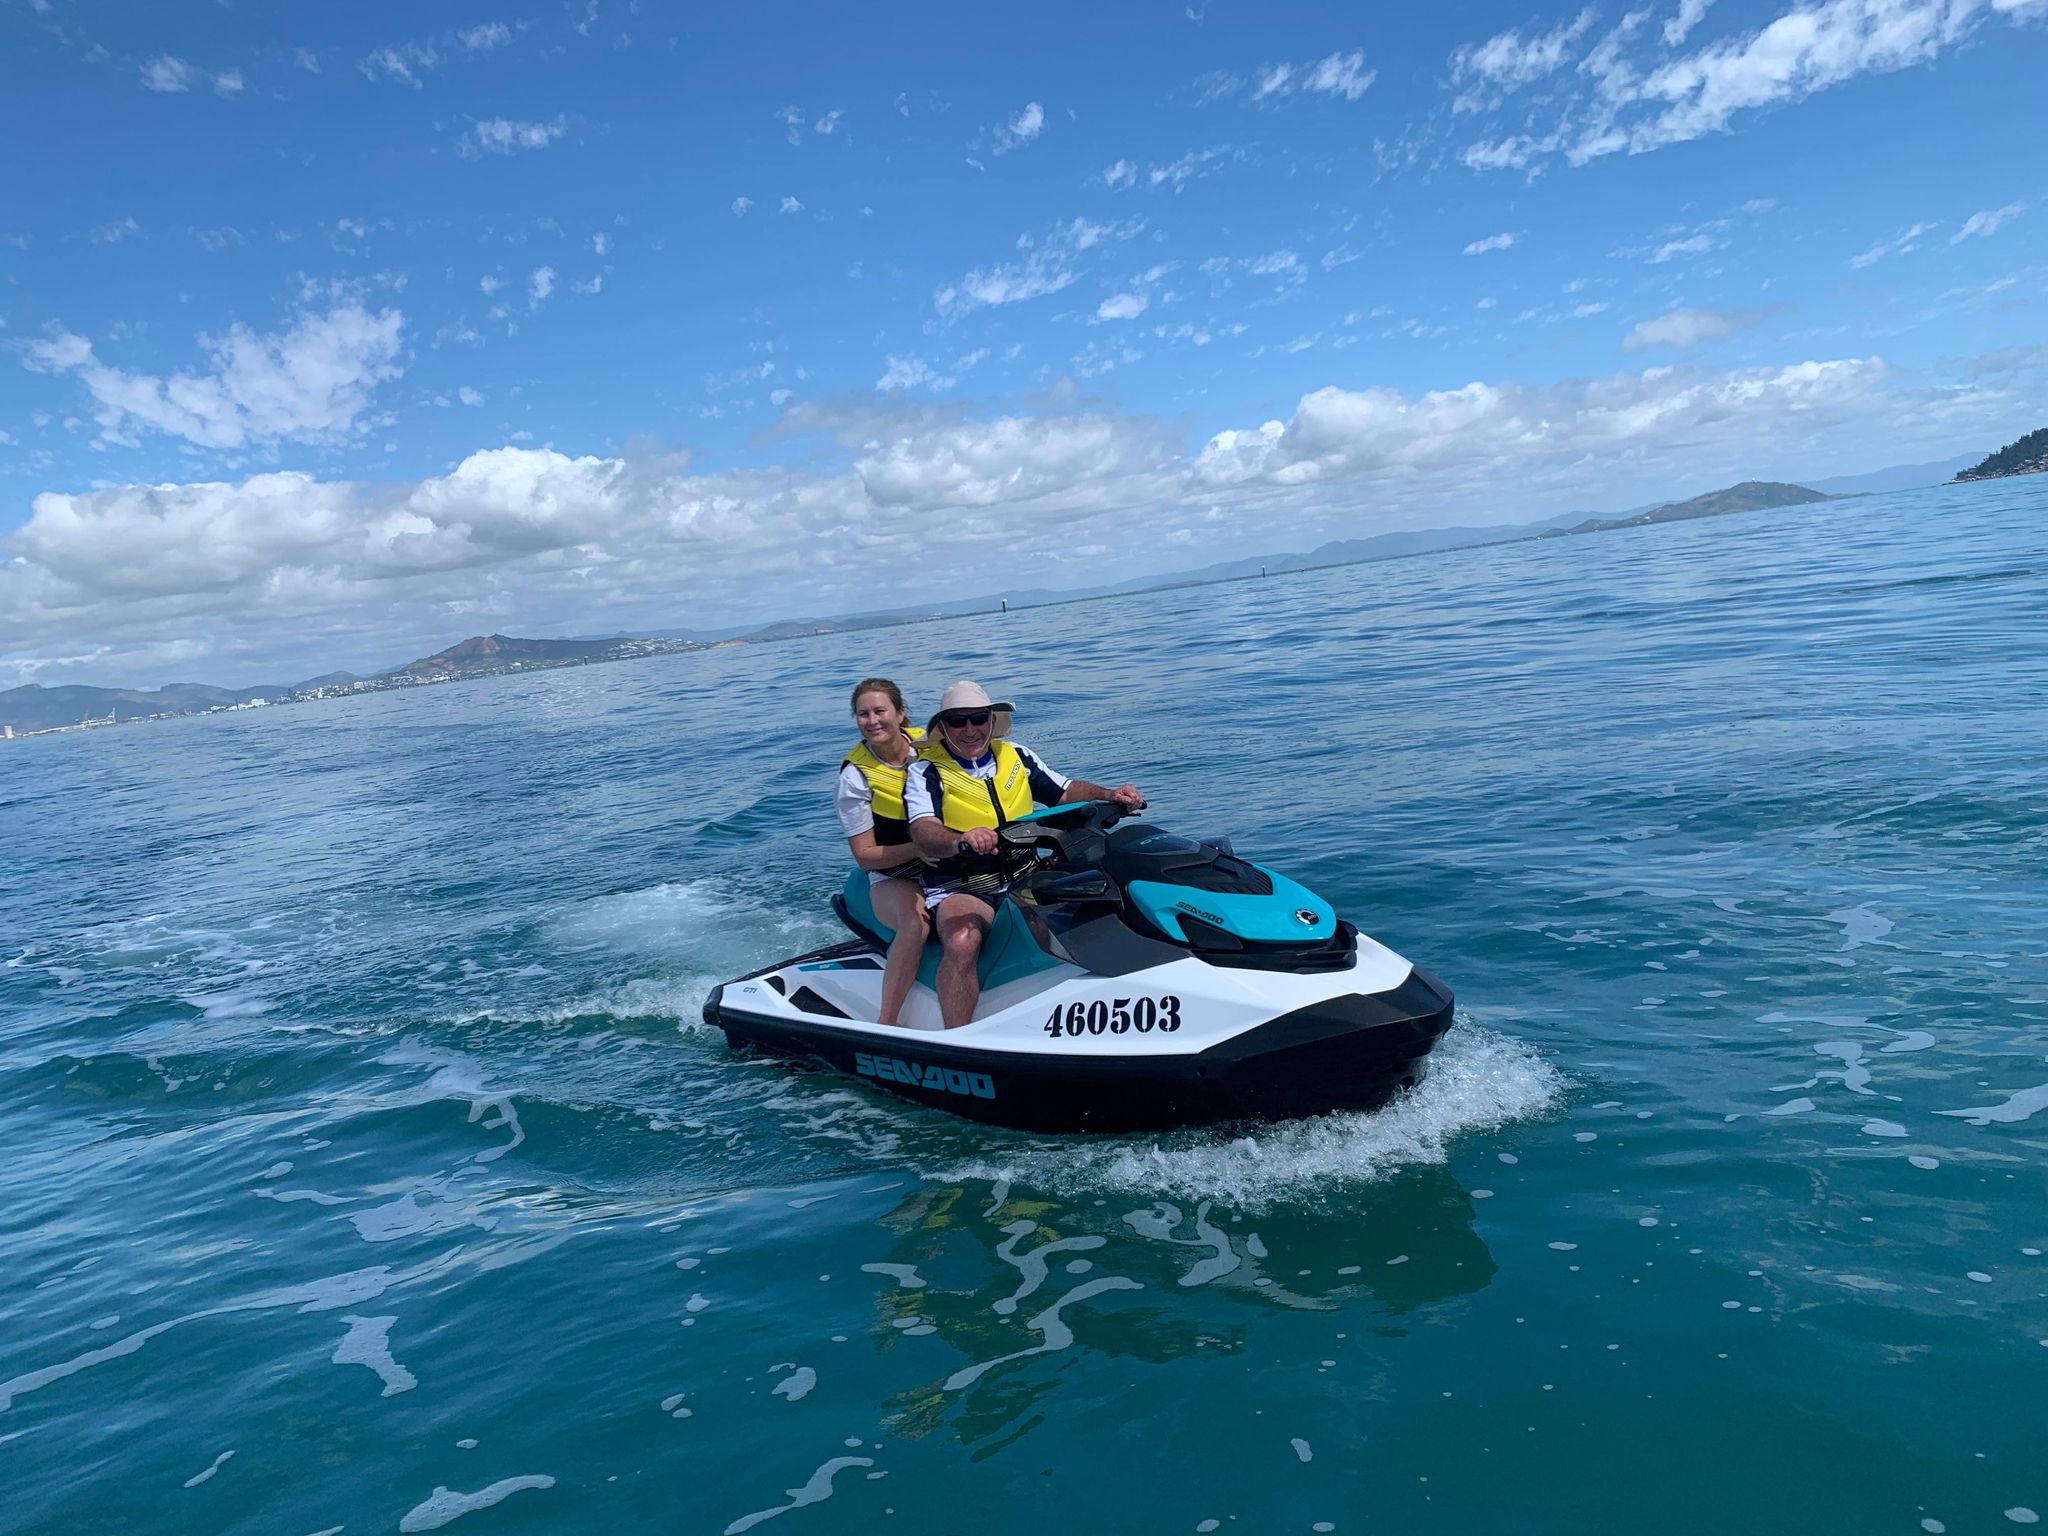 Snorkelling Magnetic Island (2 hours)